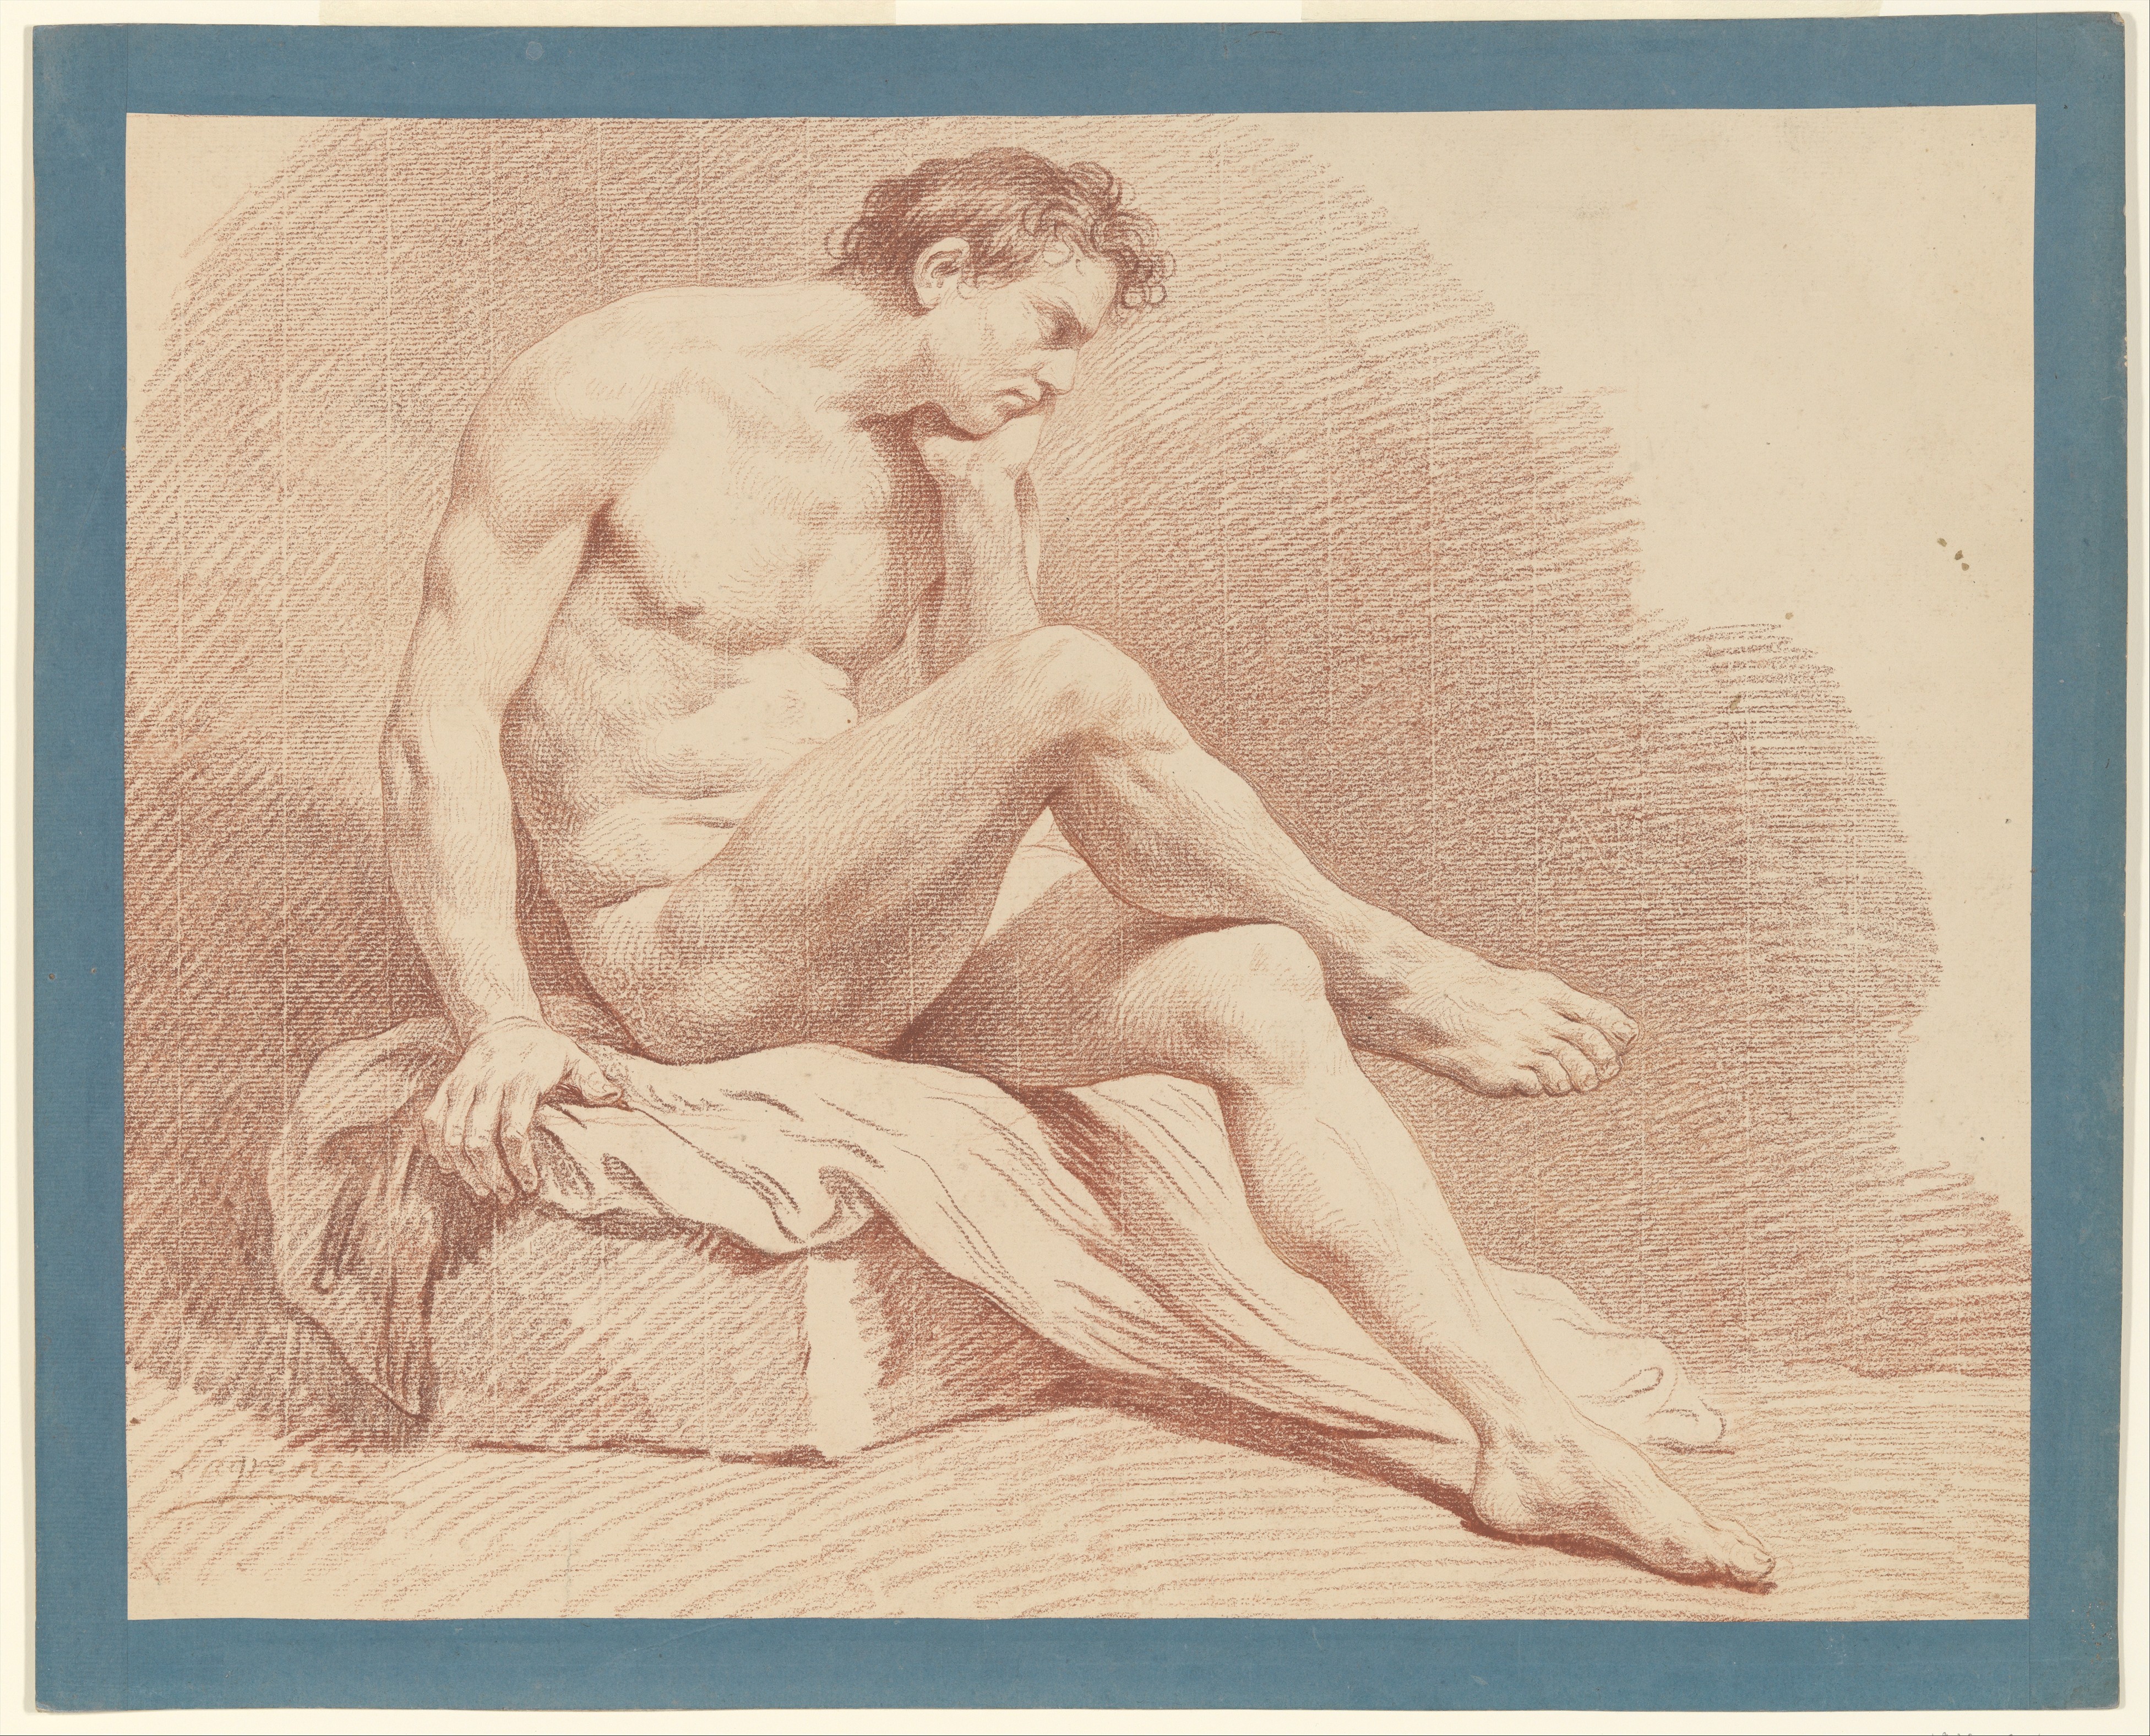 Nudes in Academic Art: Louis Lagrenée, Seated Male Nude, The Metropolitan Museum of Art, New York, NY, USA